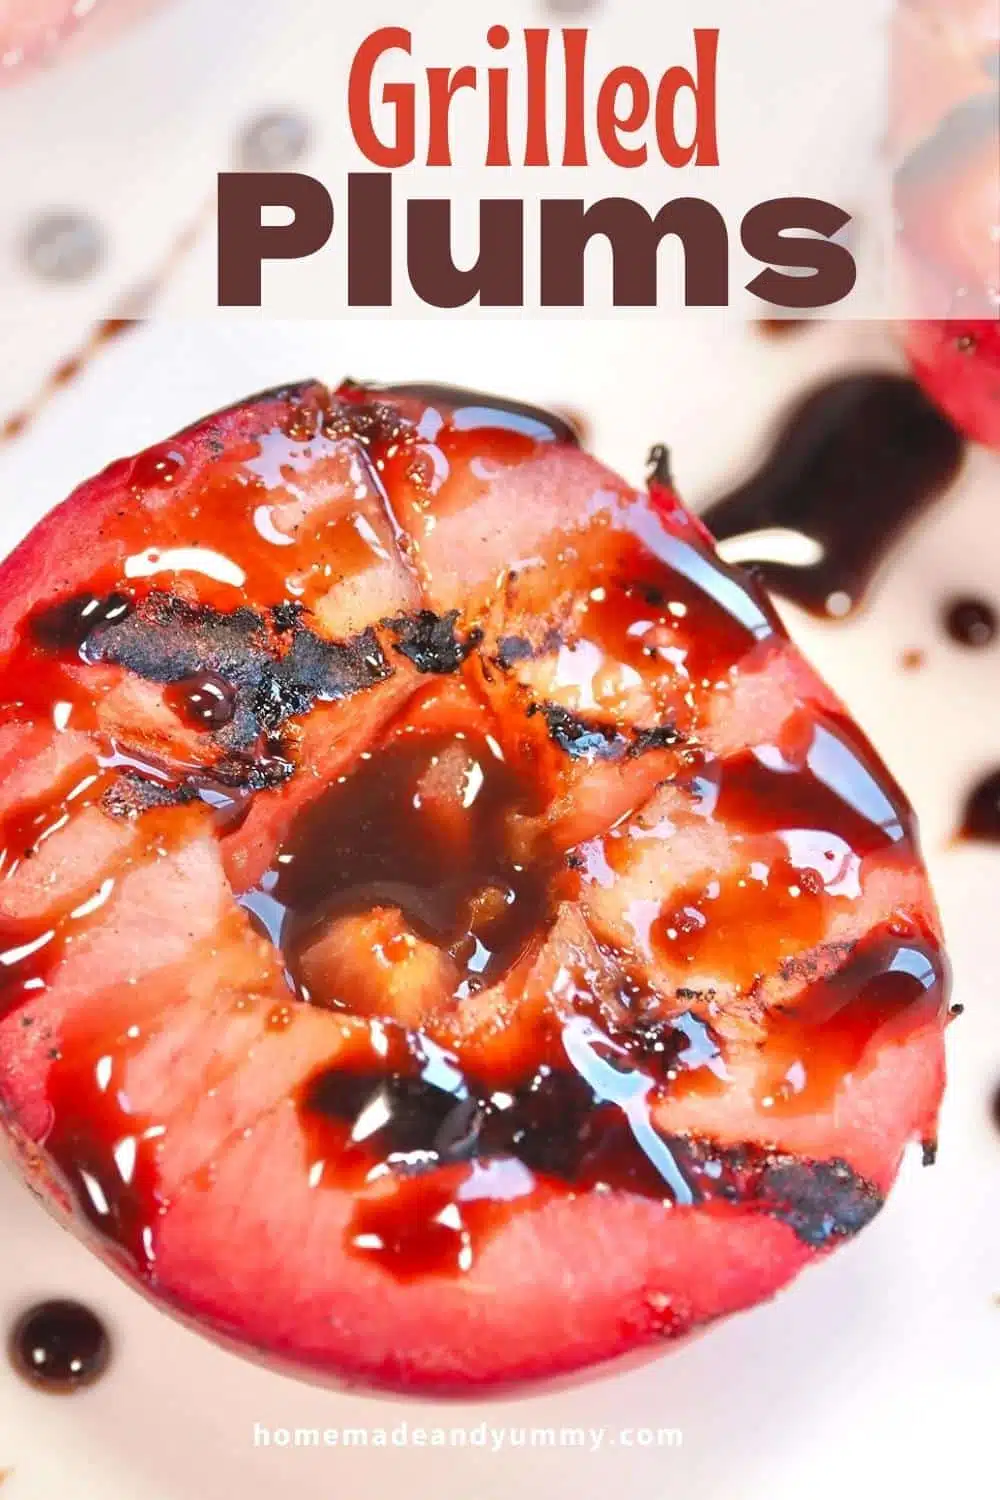 Pin image for grilled plum recipe.